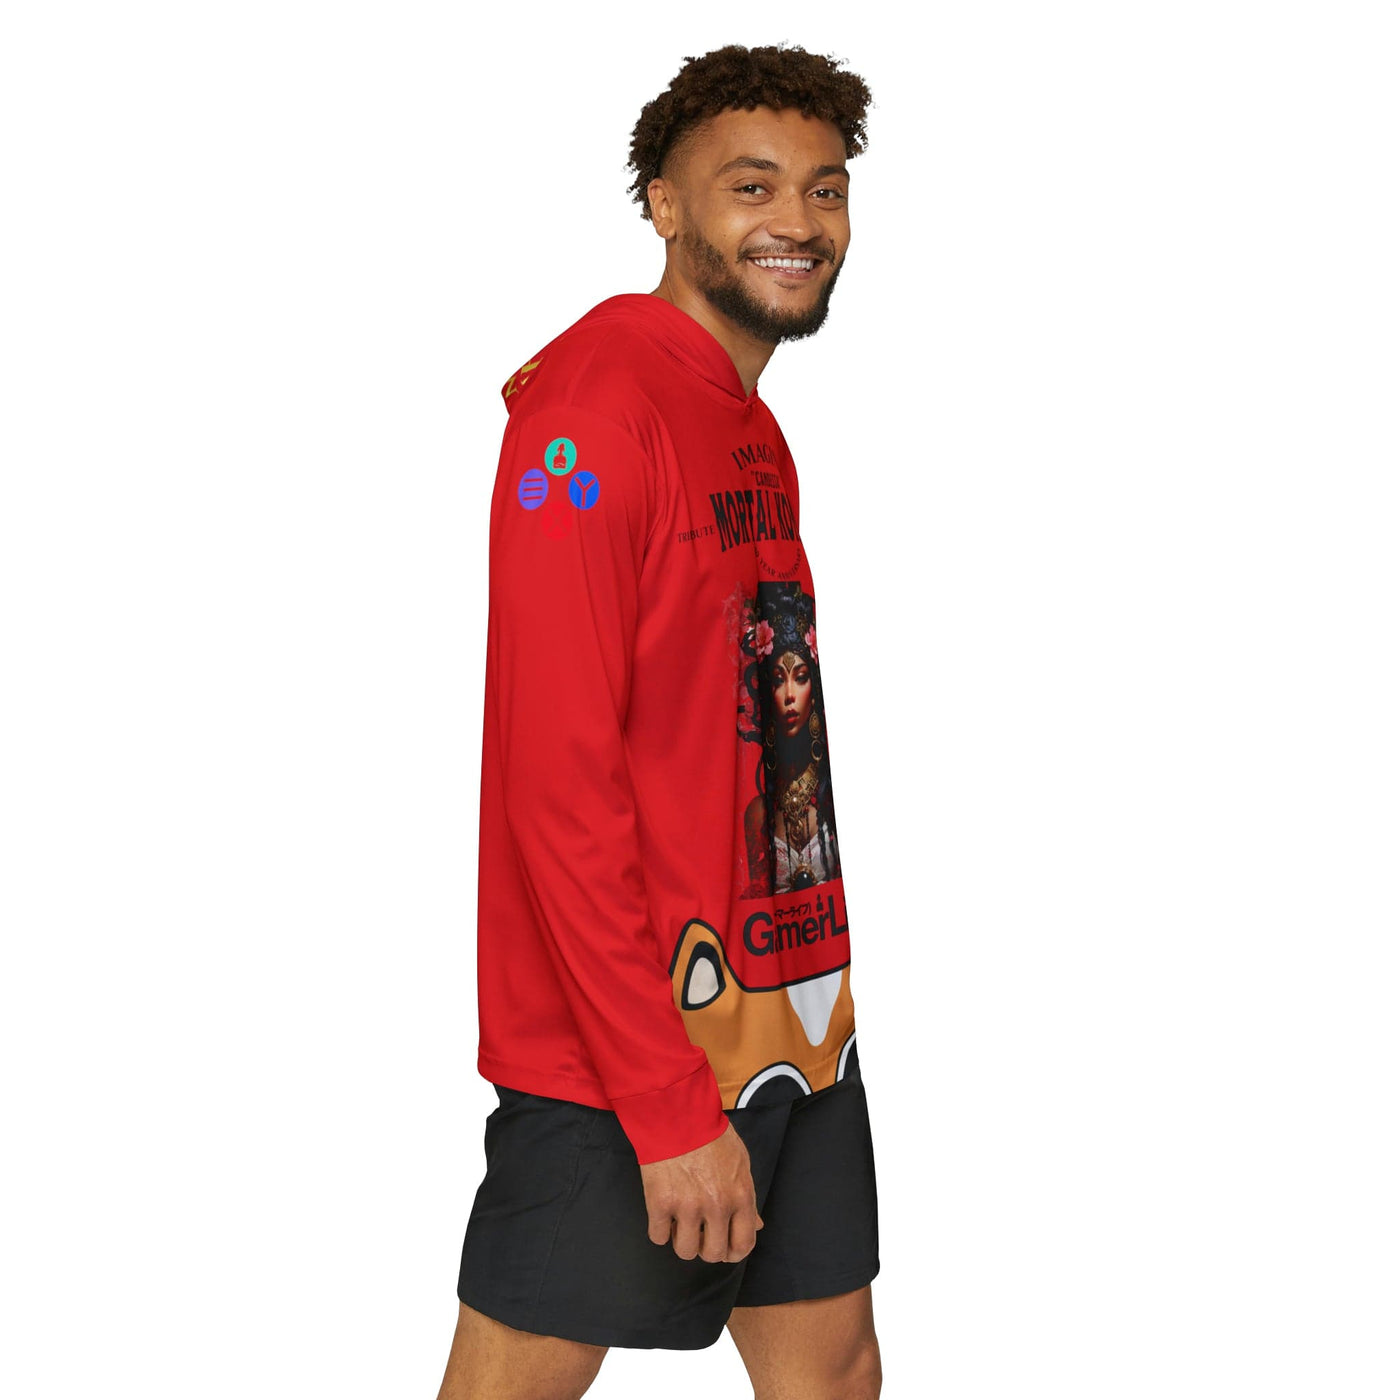 Gamer Fresh Arturo Nuro Collection | Play Awesome | Mortal Kombat 30 Year Anniversary | Candessa Limited Edition Tribute | Athletic Warmup Red Hoodie